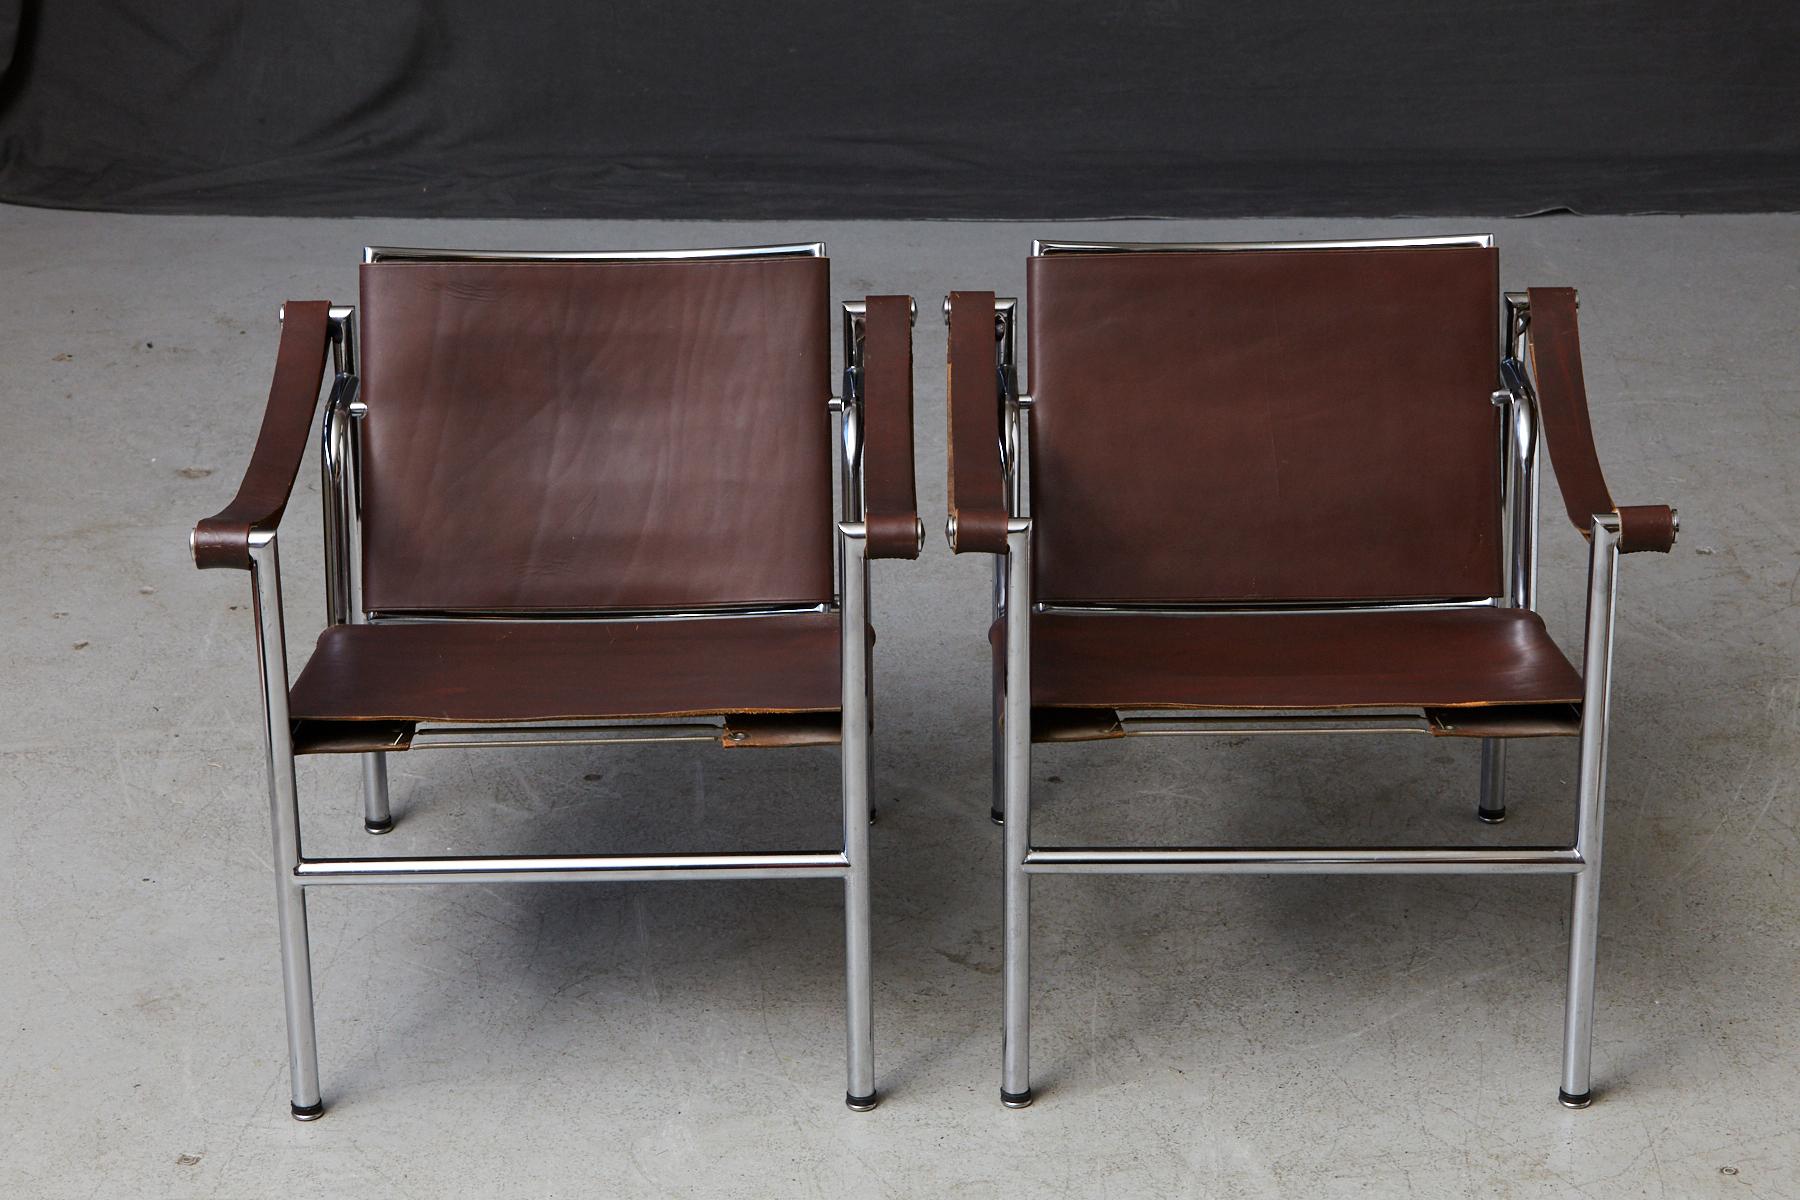 An extraordinary pair of original 'Corbu' armchairs, designed by Le Corbusier, Charlotte Perriand and Pierre Jeanneret, manufactured by Wohnbedarf in Switzerland and imported by Stendig Inc in the 1960s.
The chair is now called the LC1 and is